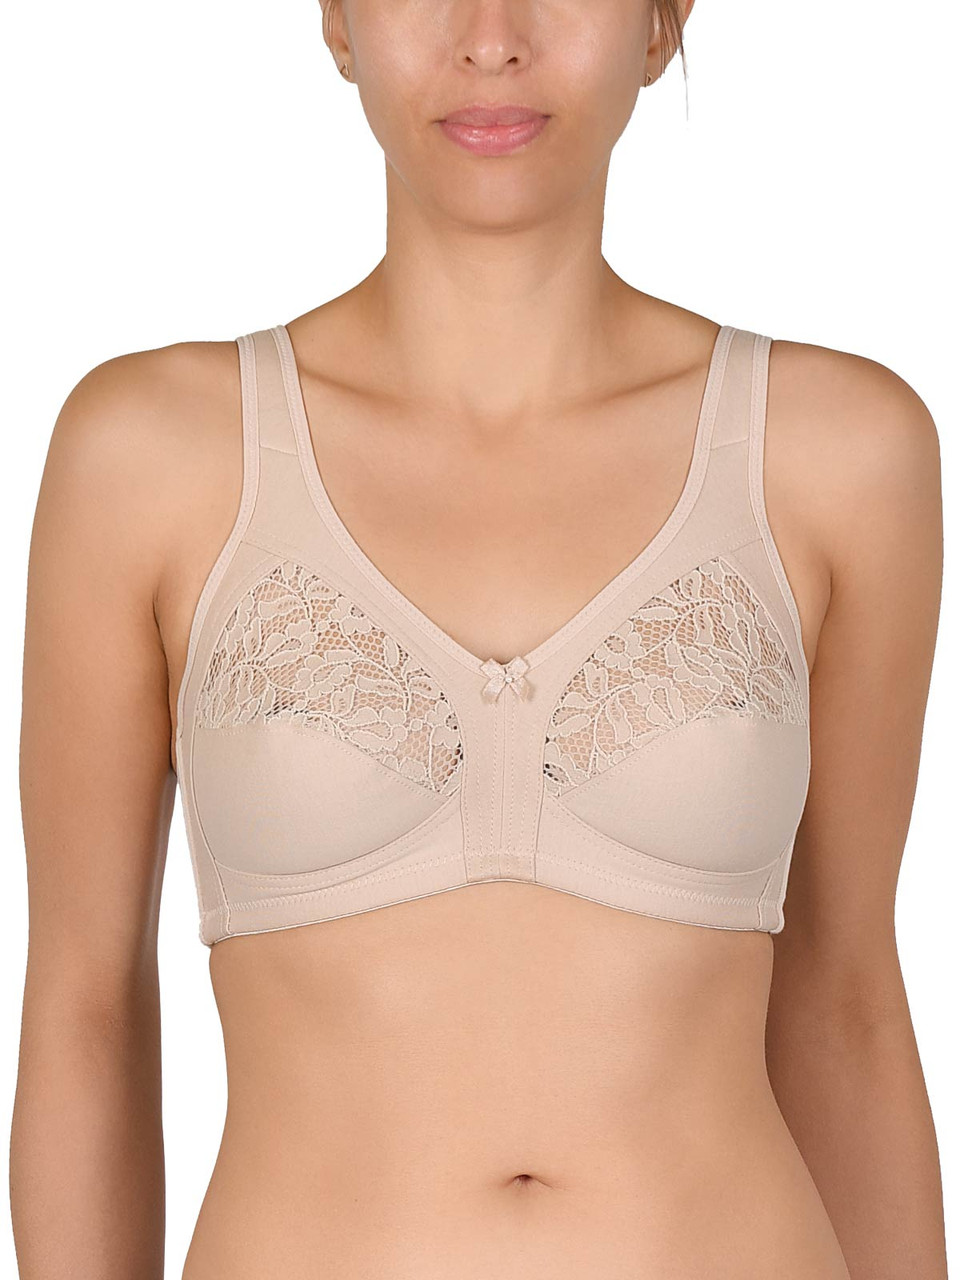 Naturana Front Fastening Bra Non Wired Soft Cup 85943